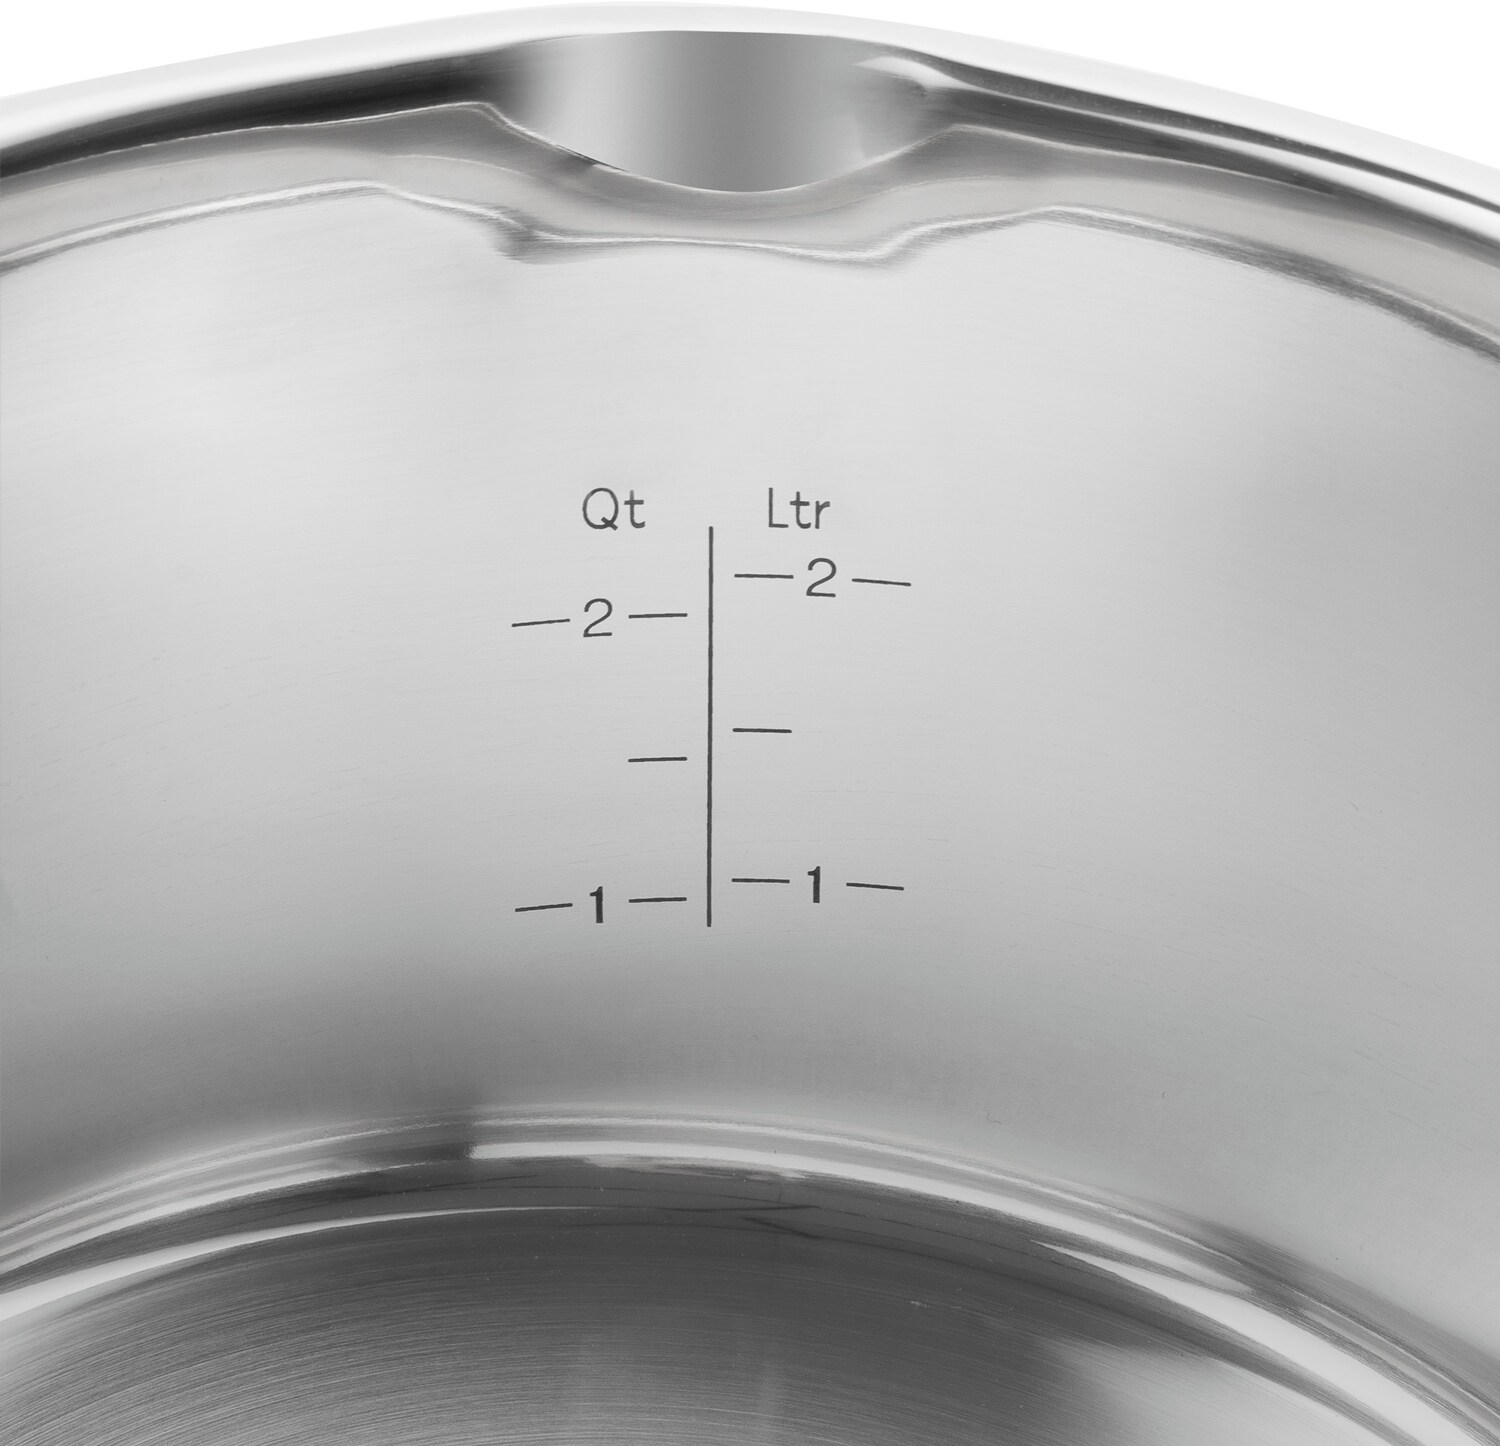 Zwilling Simplify Pot Set 5 Pieces - Cookware Sets Stainless Steel - 1009150